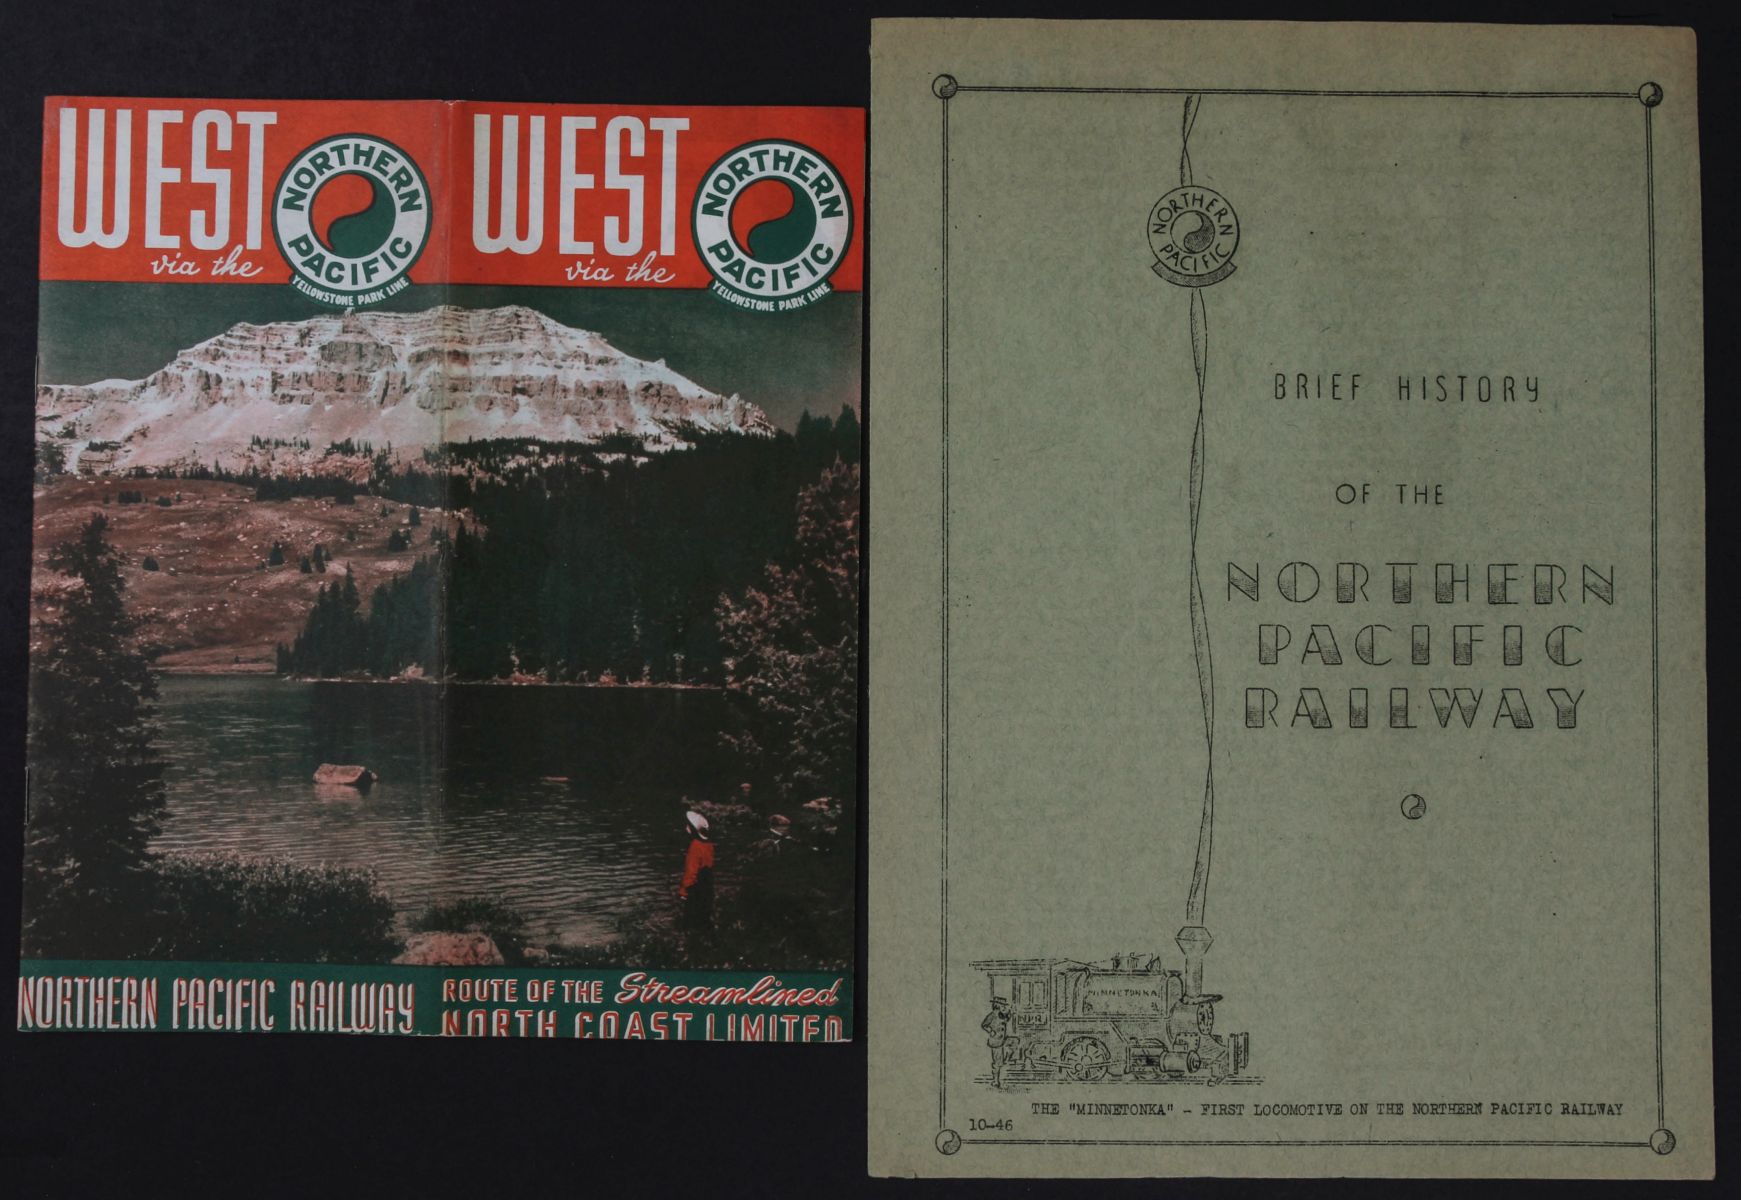 A COLLECTION OF NORTHERN PACIFIC RAILROAD EPHEMERA